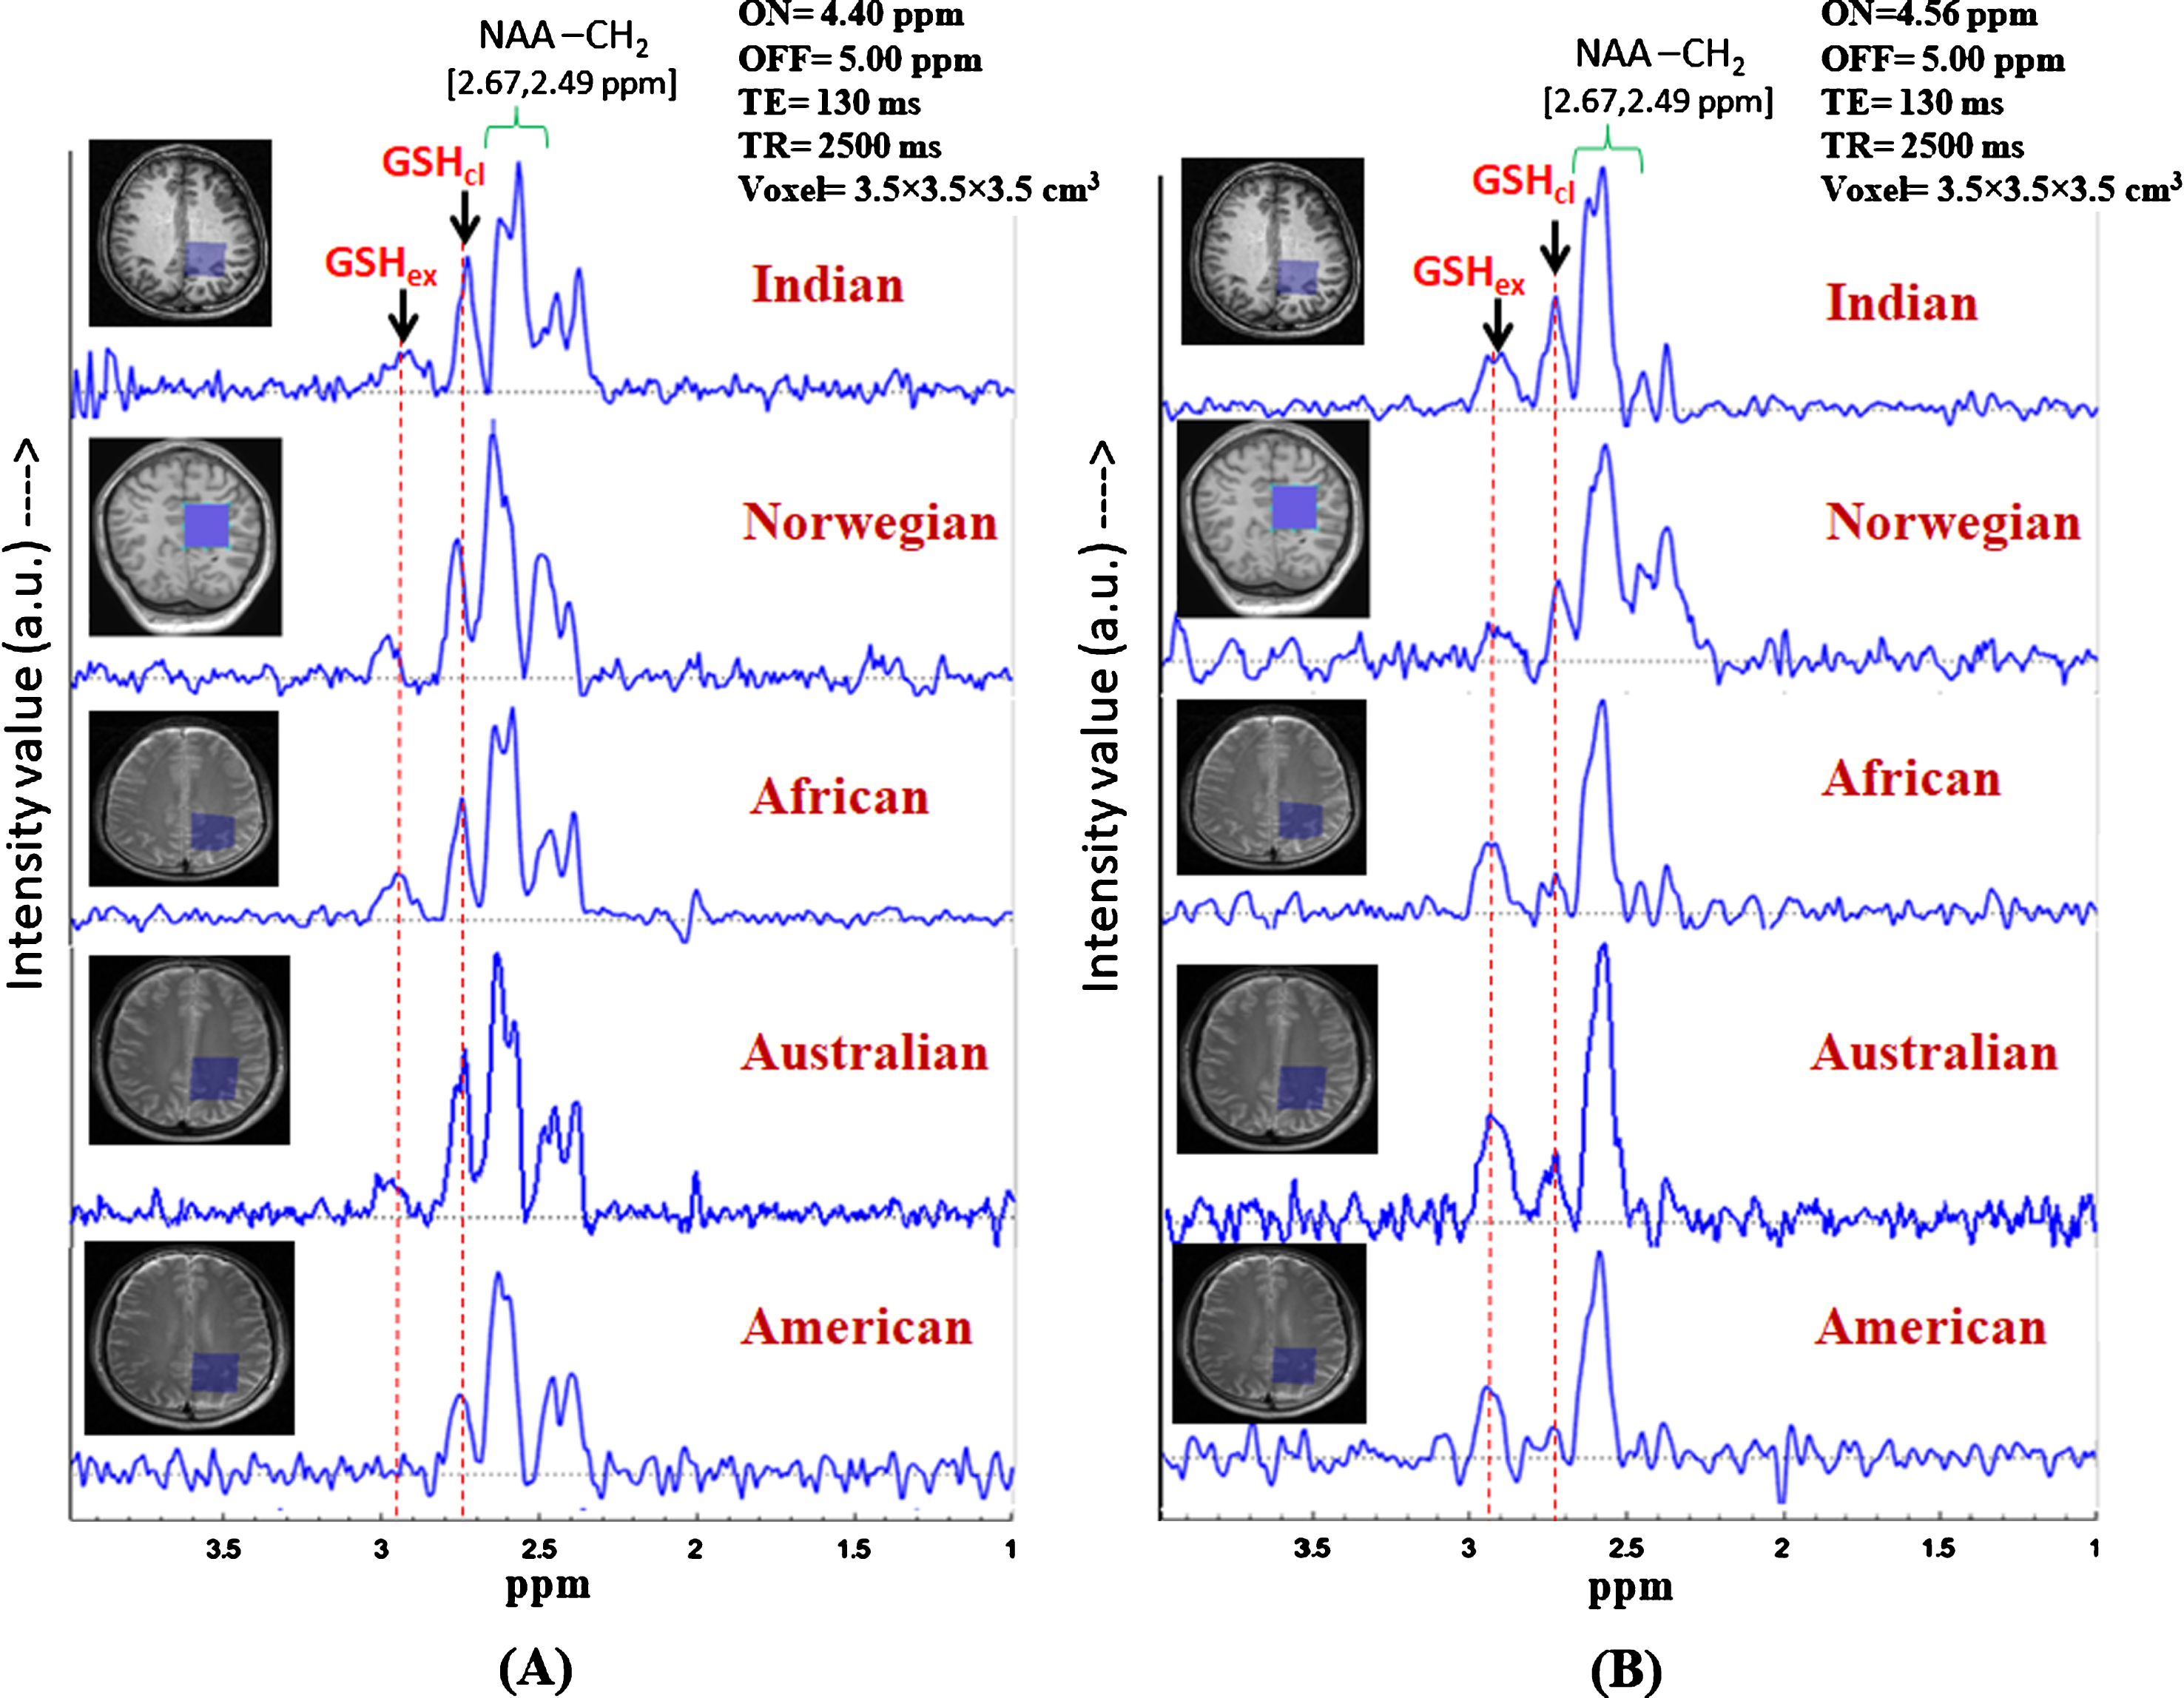 Identification of the two in vivo GSH conformer peaks in controls subjects from different continents. (Data from Indian subject, subject from African, Australian, and American origins are collected using Philips scanner at NBRC, India, and data from Norwegian subject is collected using GE scanner at Bergen, Norway). Same MRS protocol was used for data acquisition: TE = 130 ms, TR = 2500 ms, (A) MEGA-ON/OFF = 4.40 ppm/5.00 ppm and, (B) MEGA-ON/OFF = 4.56 ppm/5.00 ppm) (voxel size = 3.5×3.5×3.5 cm3 on left parietal cortex).